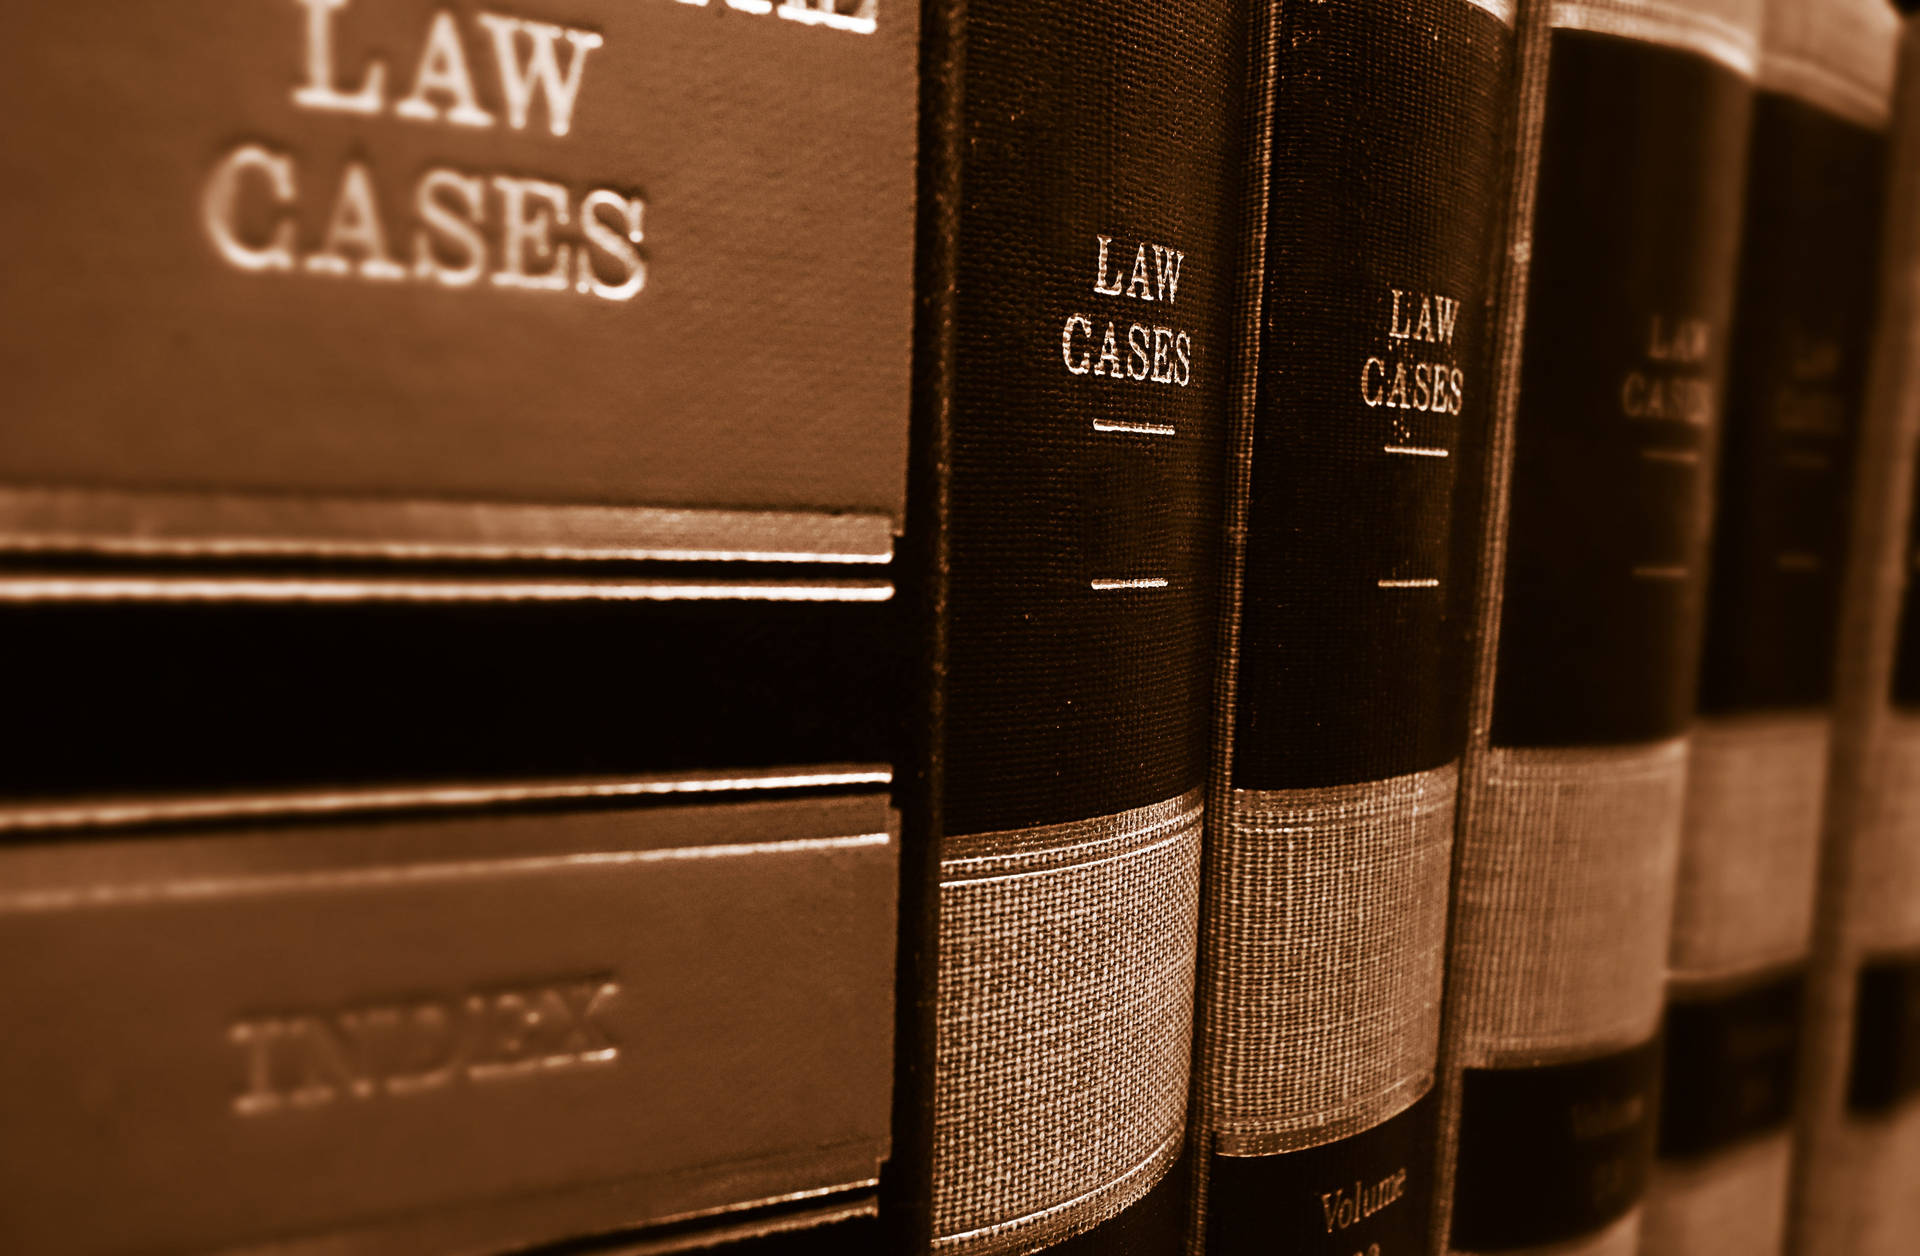 Law Cases Reference Books Background